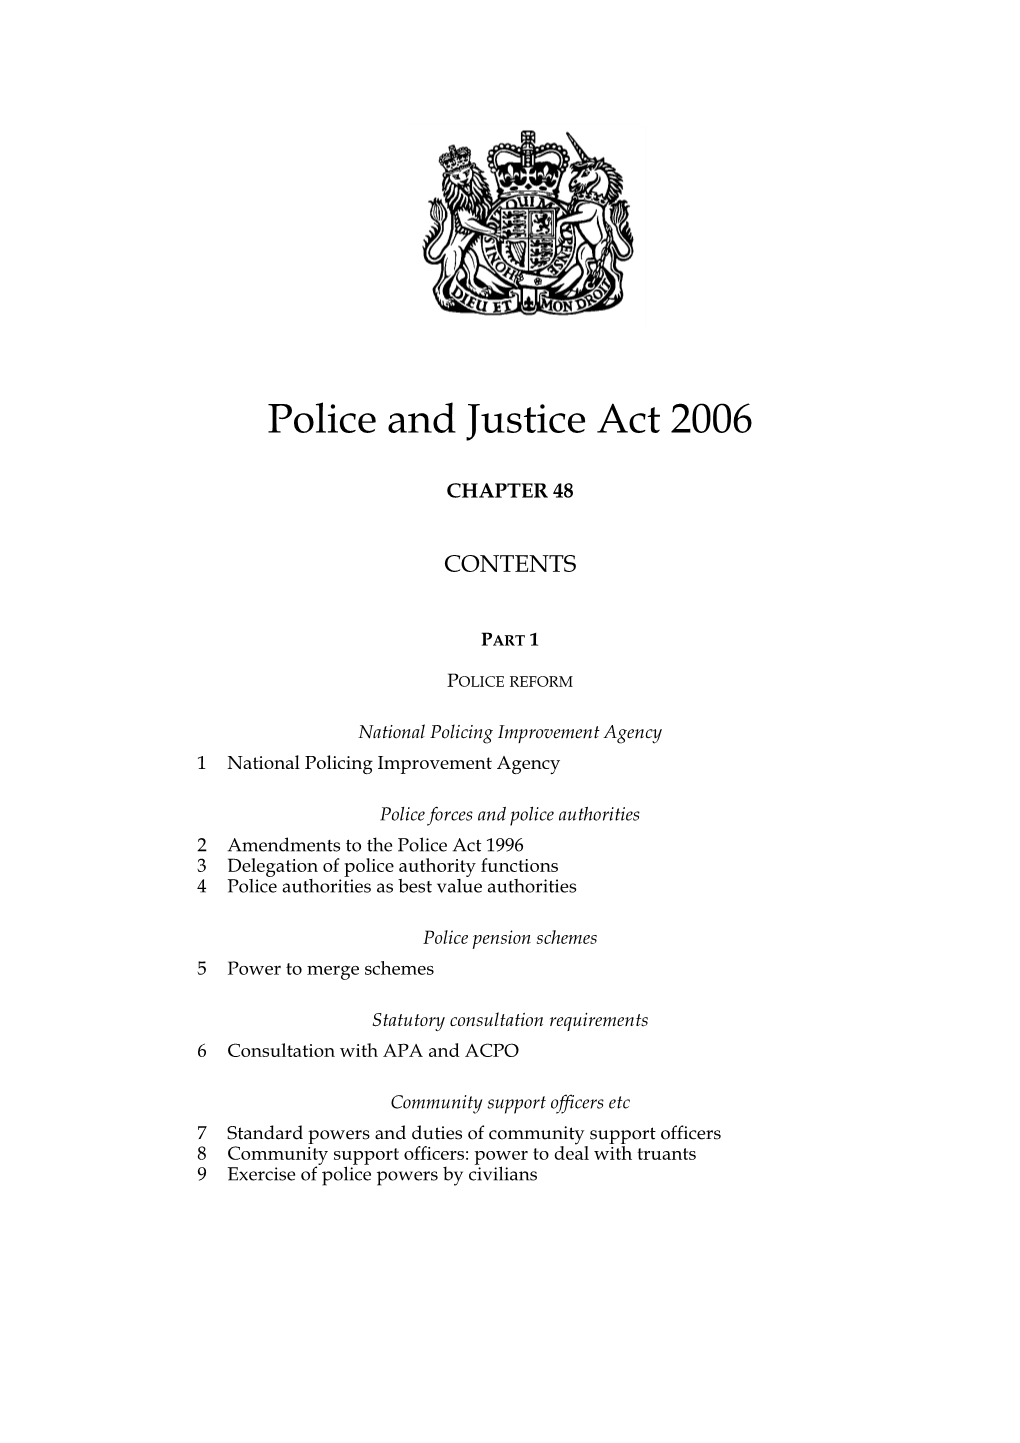 Police and Justice Act 2006